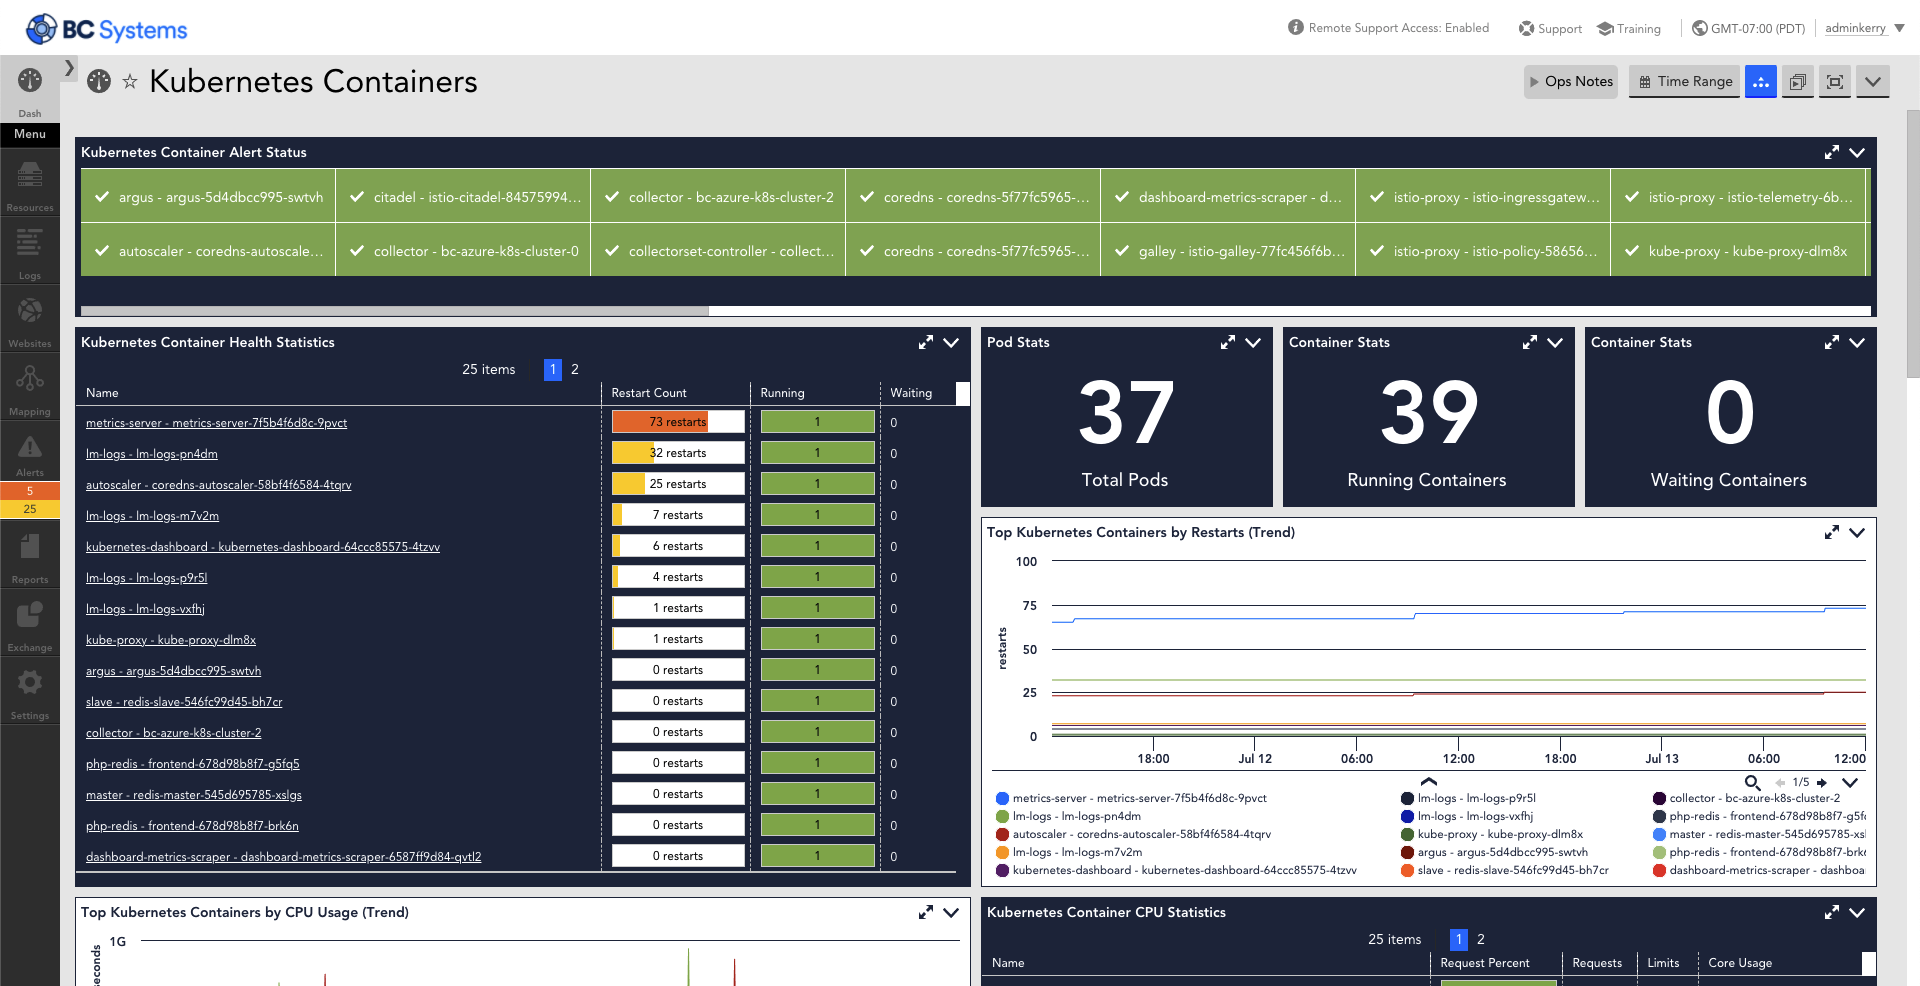 http://This%20dashboard%20provides%20various%20metrics%20that%20are%20monitored%20for%20Kubernetes%20Containers%20using%20the%20Kubernetes%20cluster%20API.